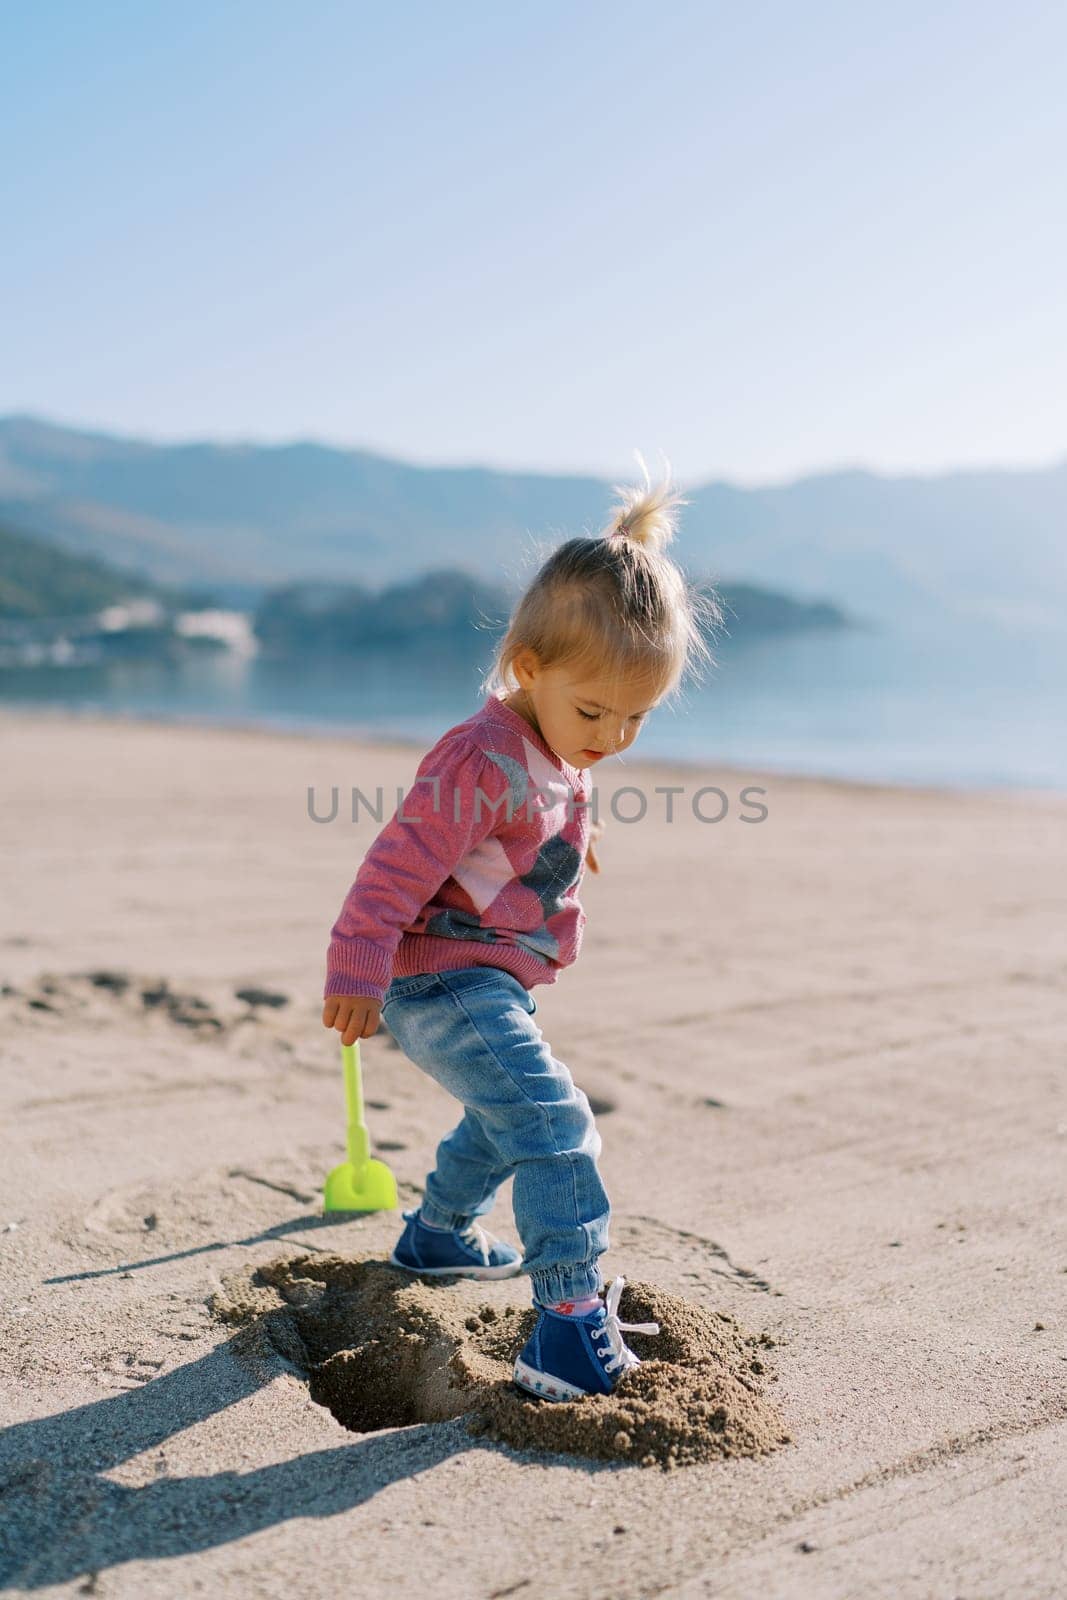 Little girl gets her foot into a hole in the sand on the beach near a toy shovel. High quality photo